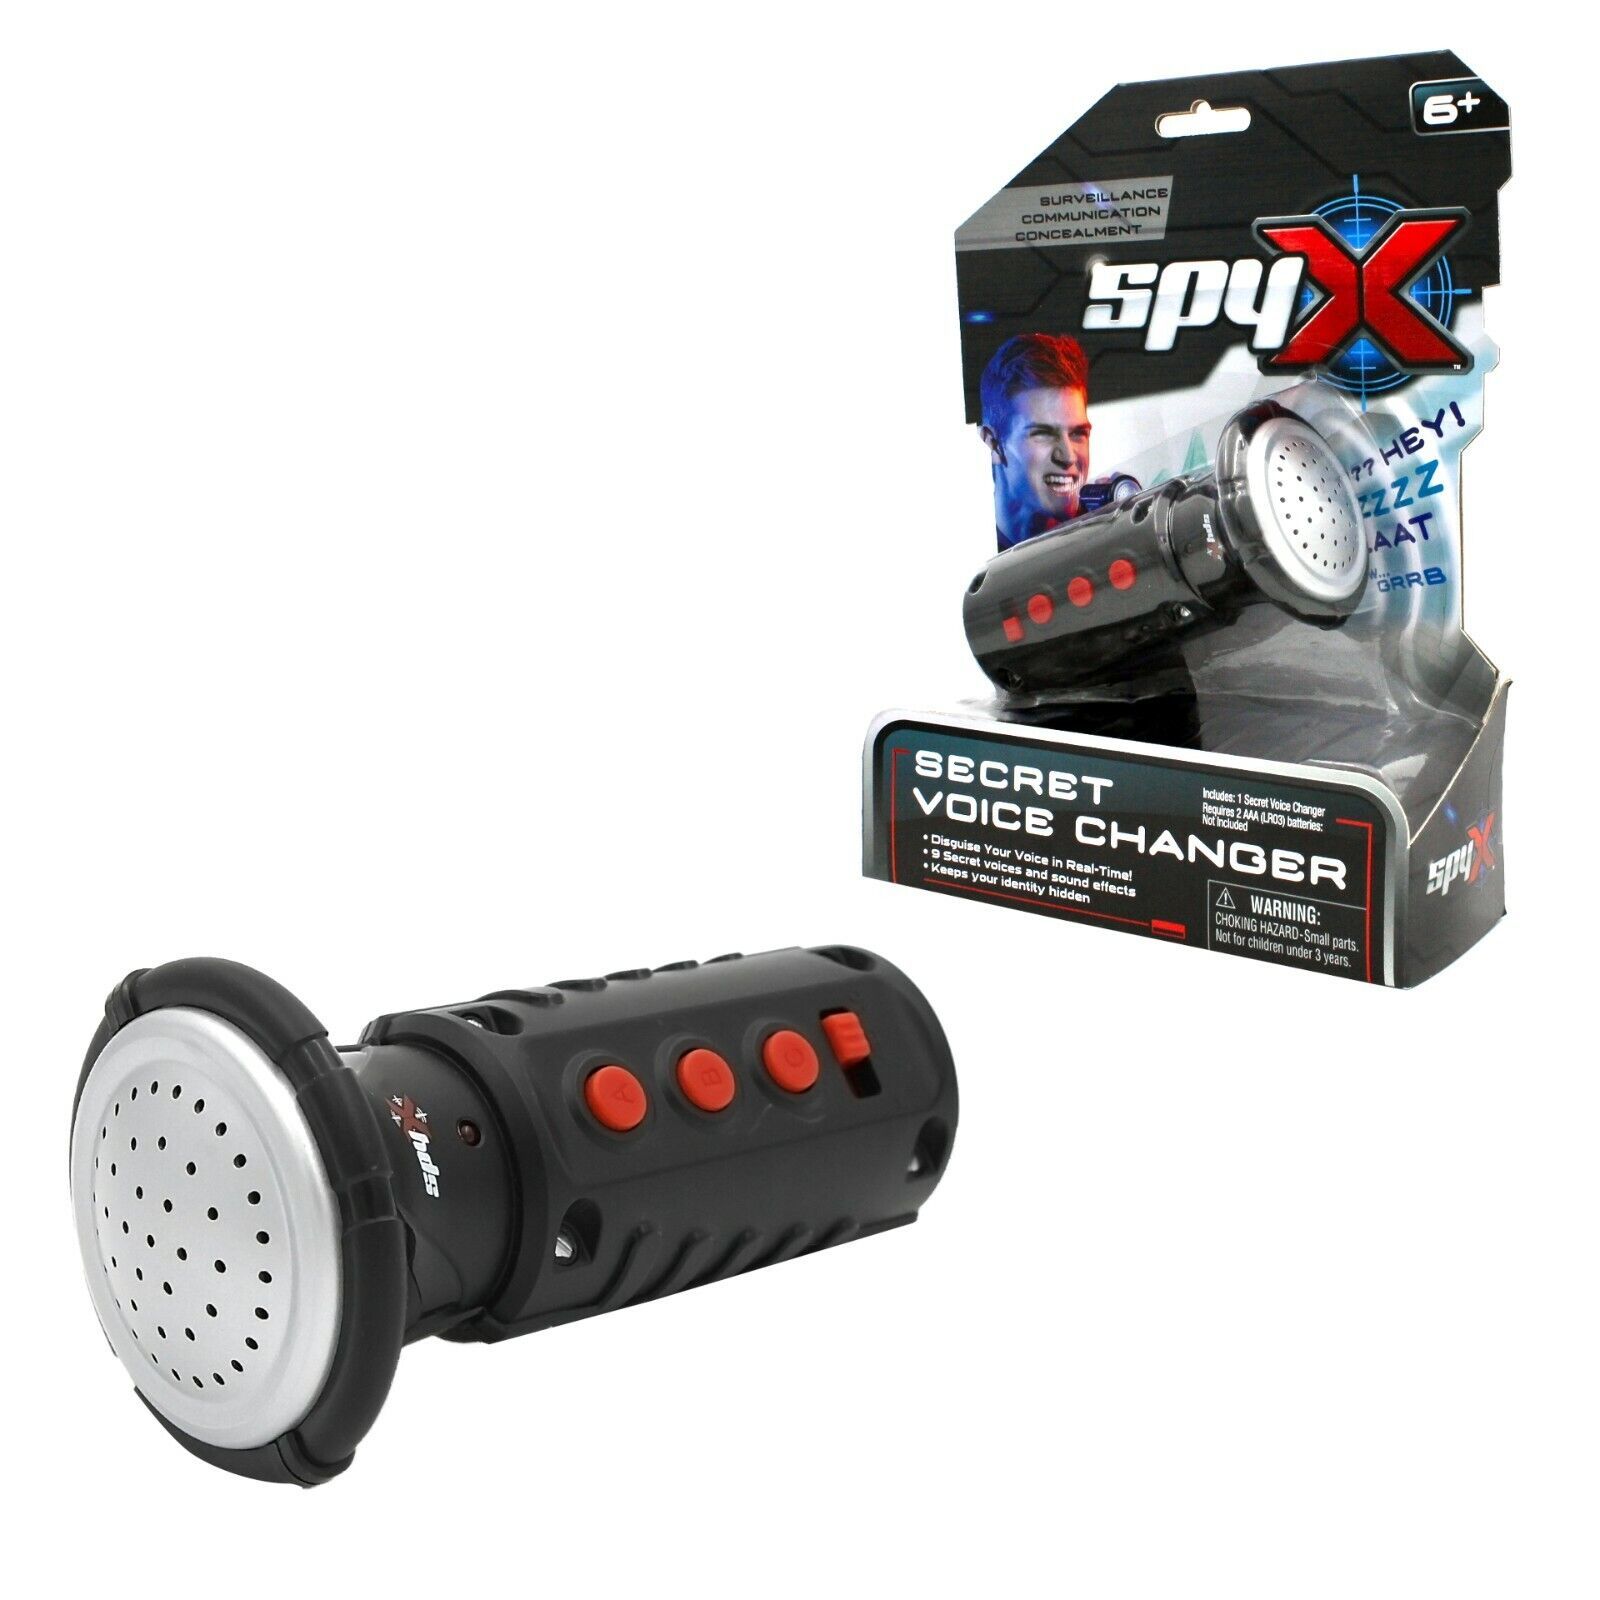 SpyX / Secret Voice Changer. Spy Toy to Disguise Your Voice In Real-Time - $19.79